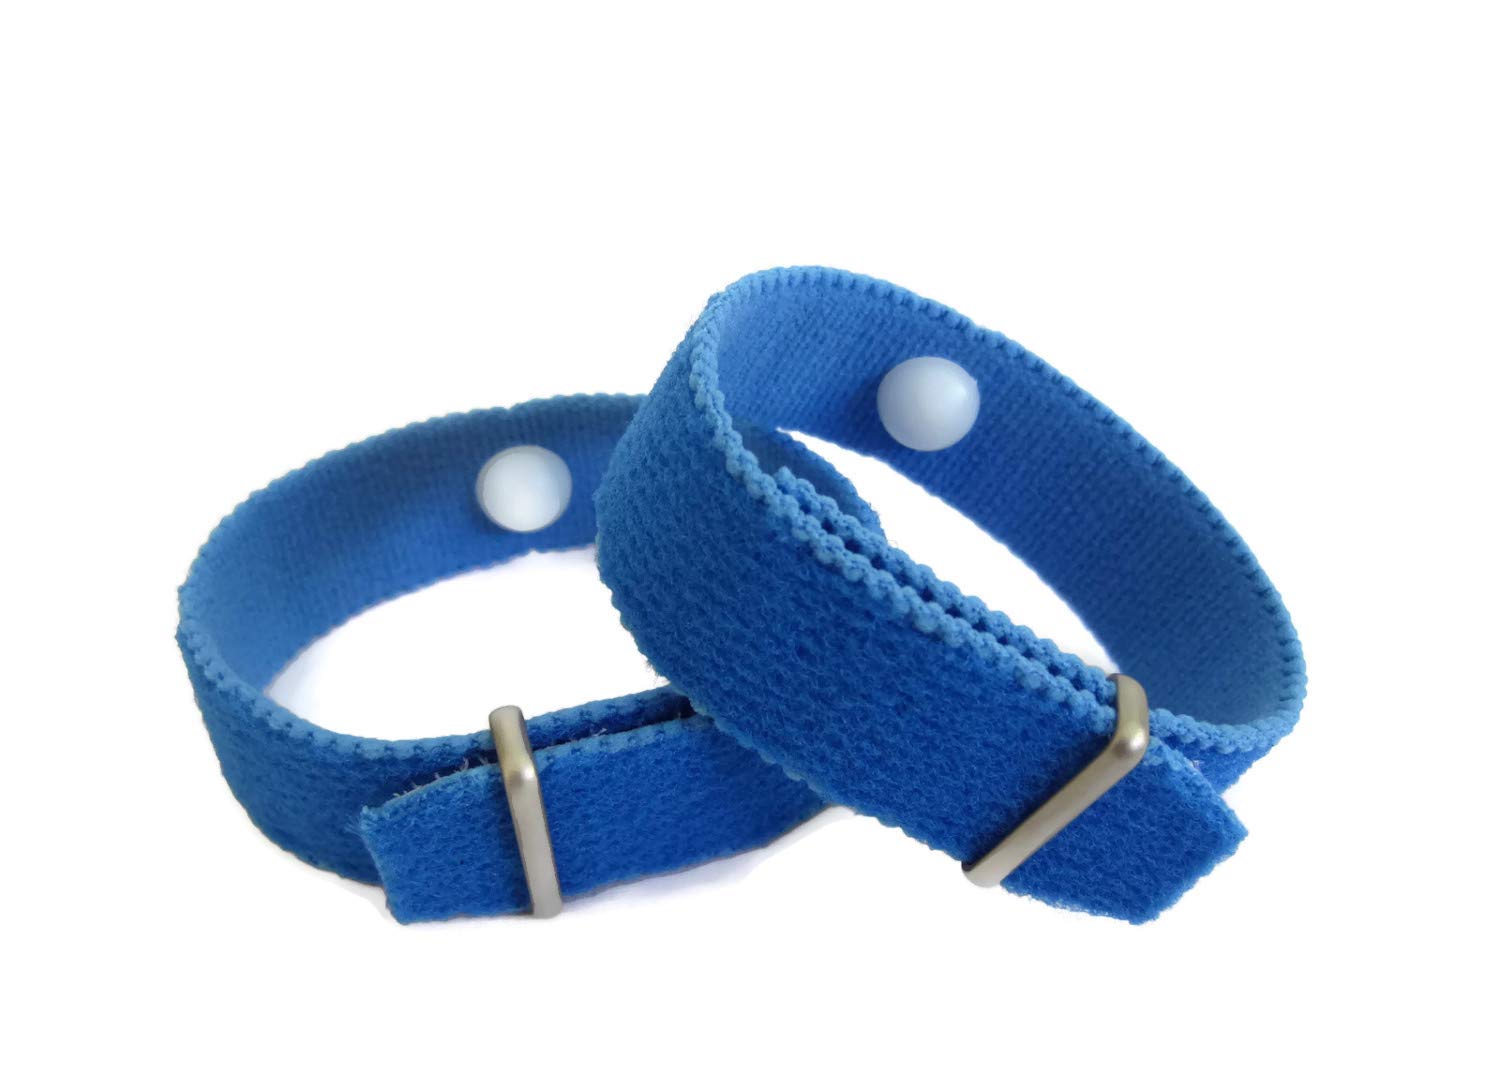 A Beginner's Guide to Using Natural Relief Bands – Blisslets